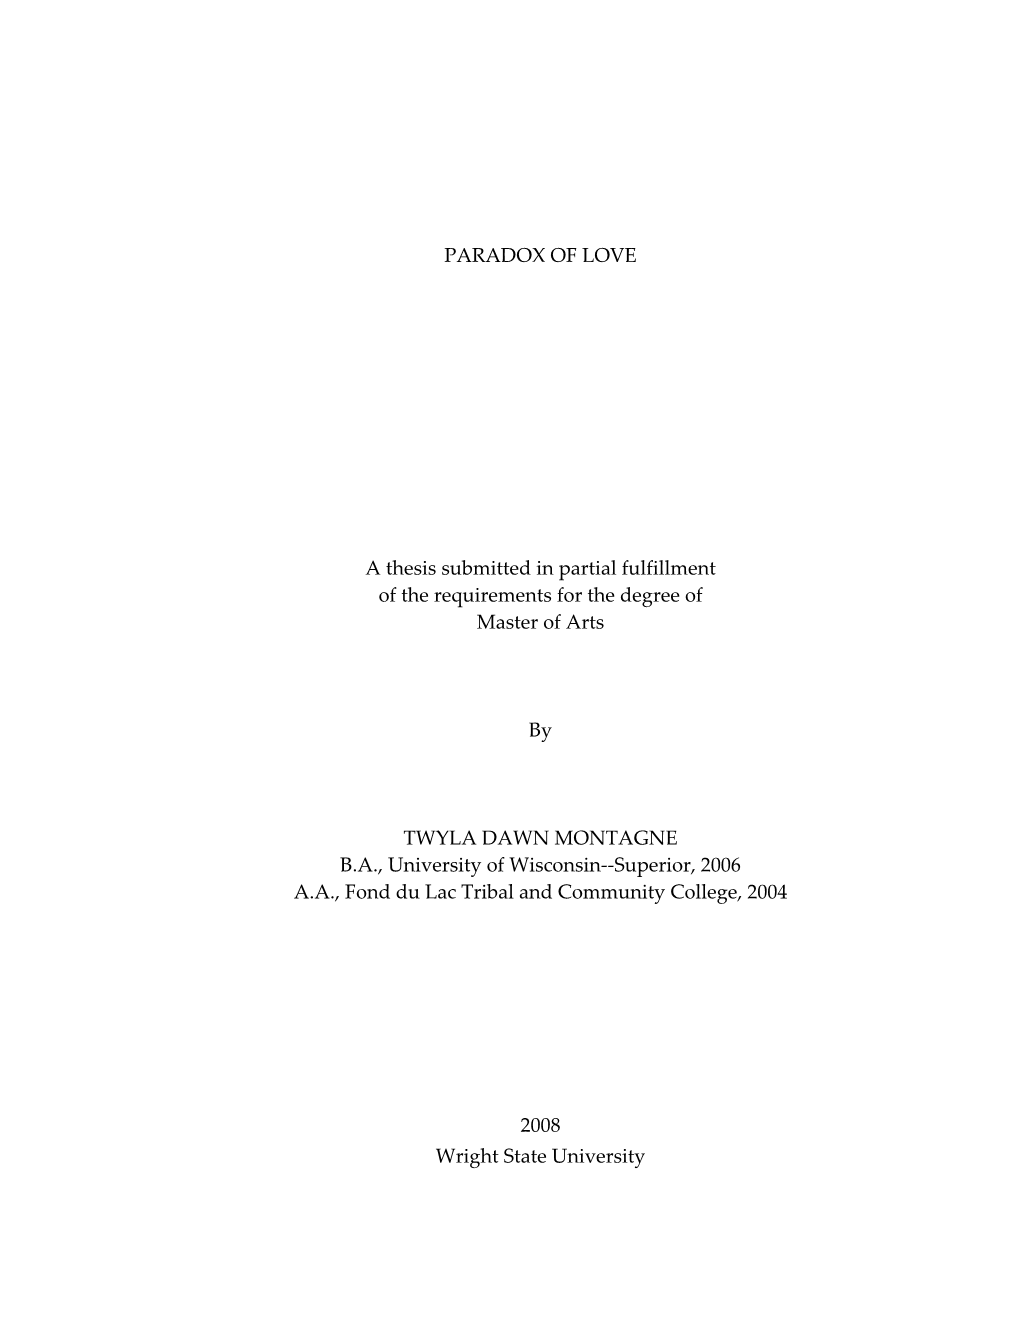 PARADOX of LOVE a Thesis Submitted in Partial Fulfillment of The